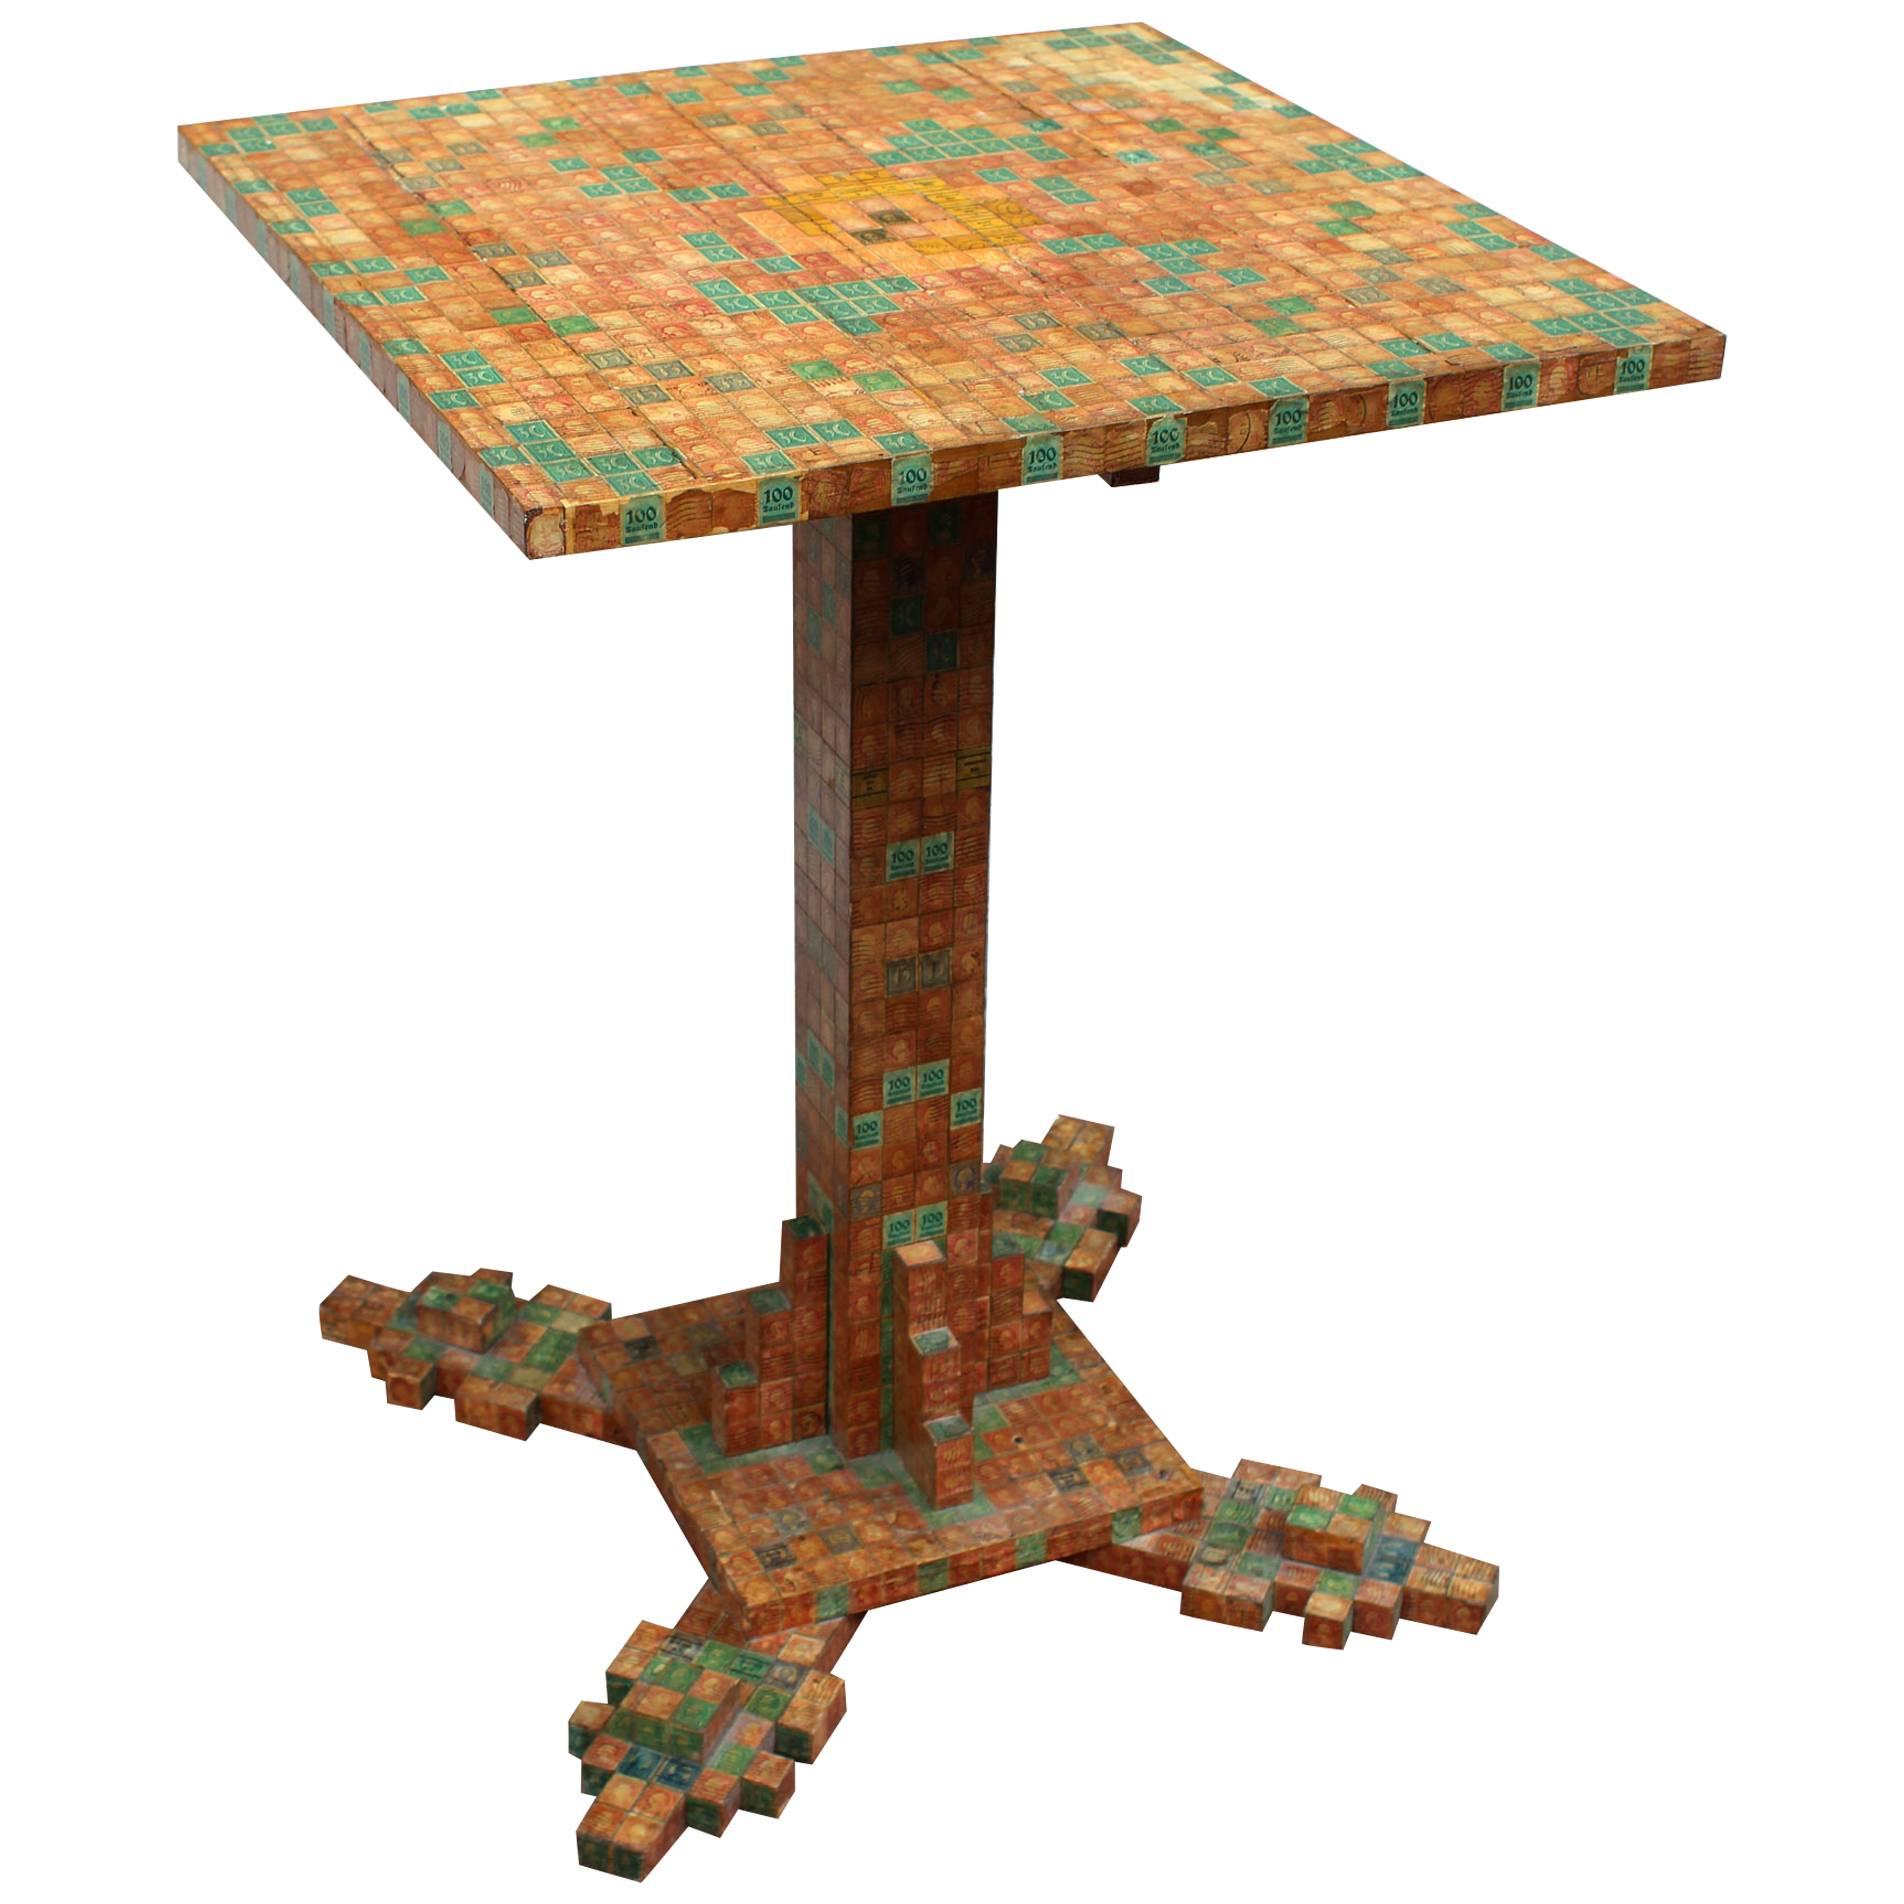 Obsessively Stamp-Decorated Folk Art Table, American Modernist For Sale